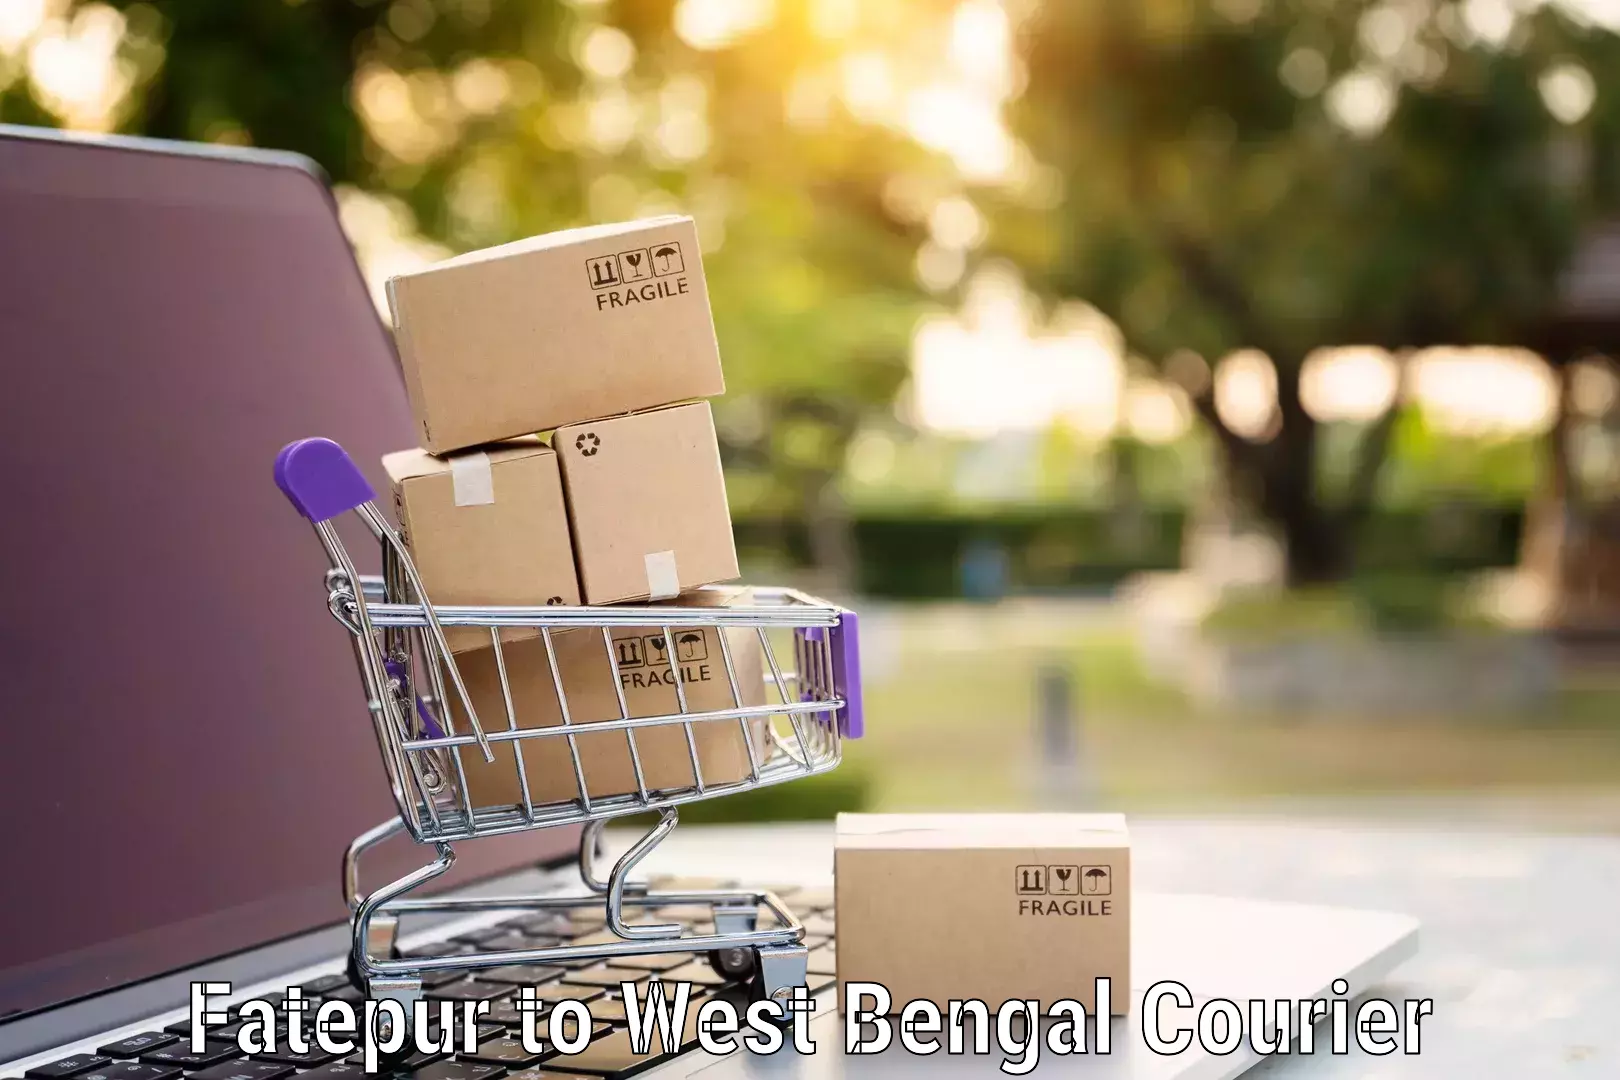 Professional moving company Fatepur to West Bengal